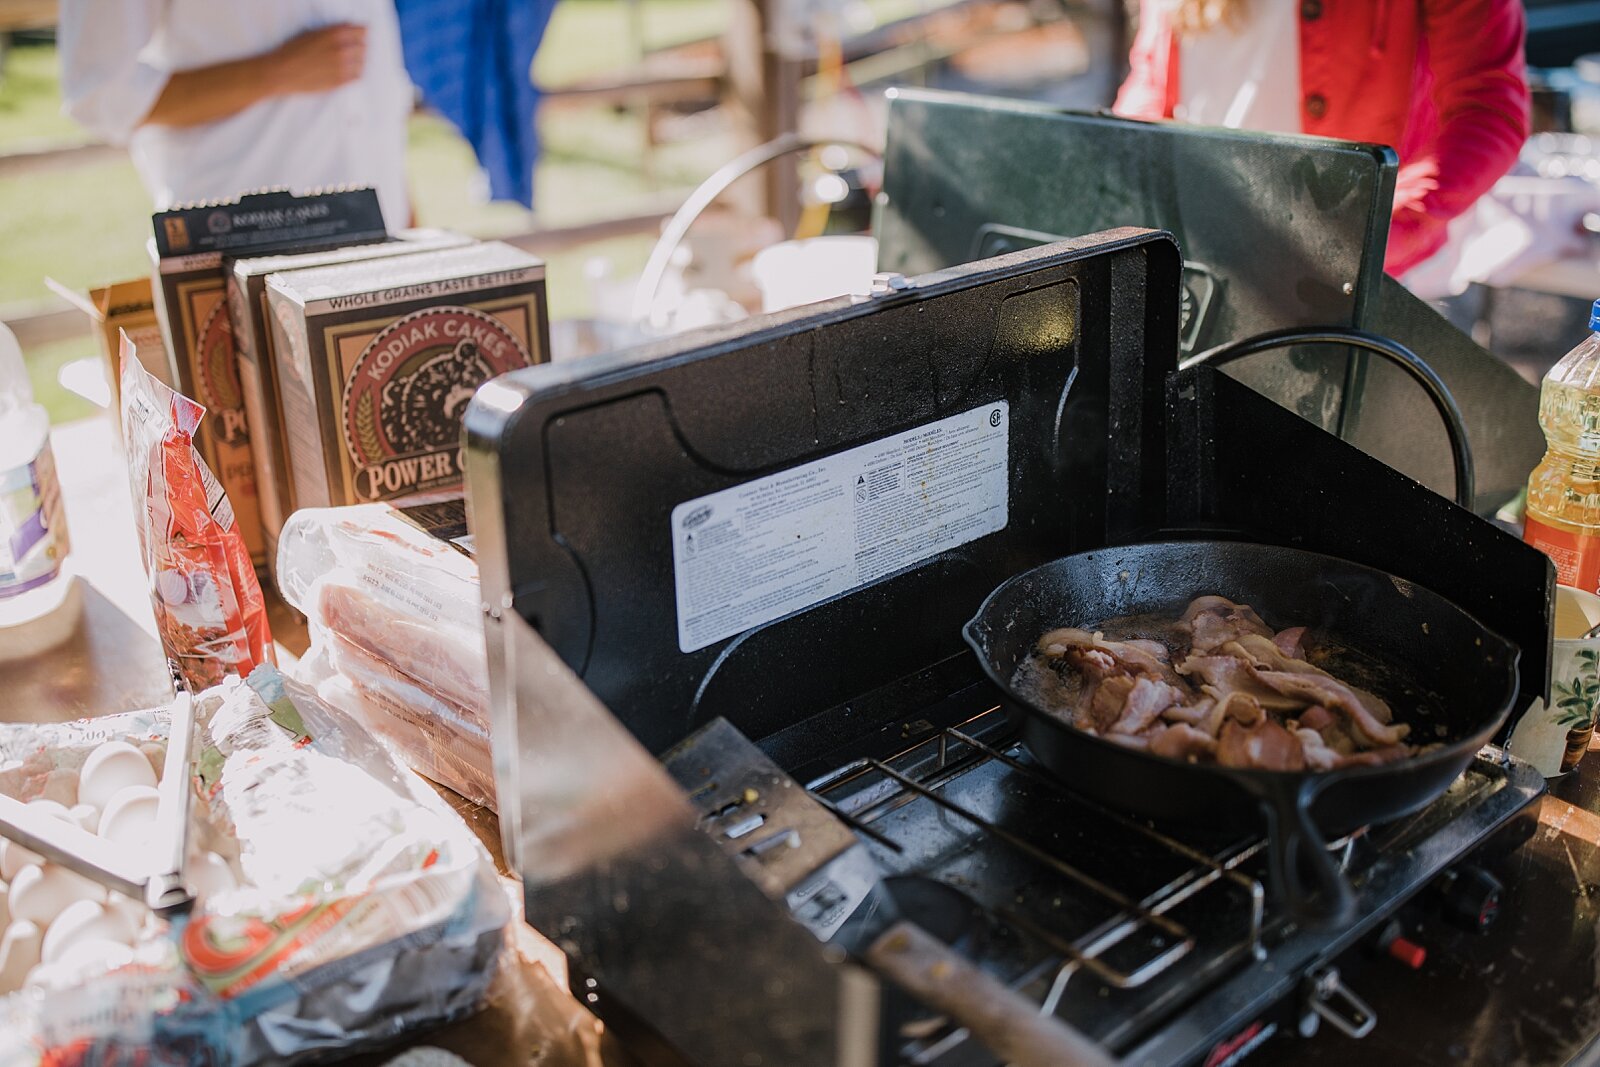 cooking bacon for breakfast, mt hood national forest, smith rock state park wedding, smith rock state park hiking elopement, terrebonne oregon backyard wedding